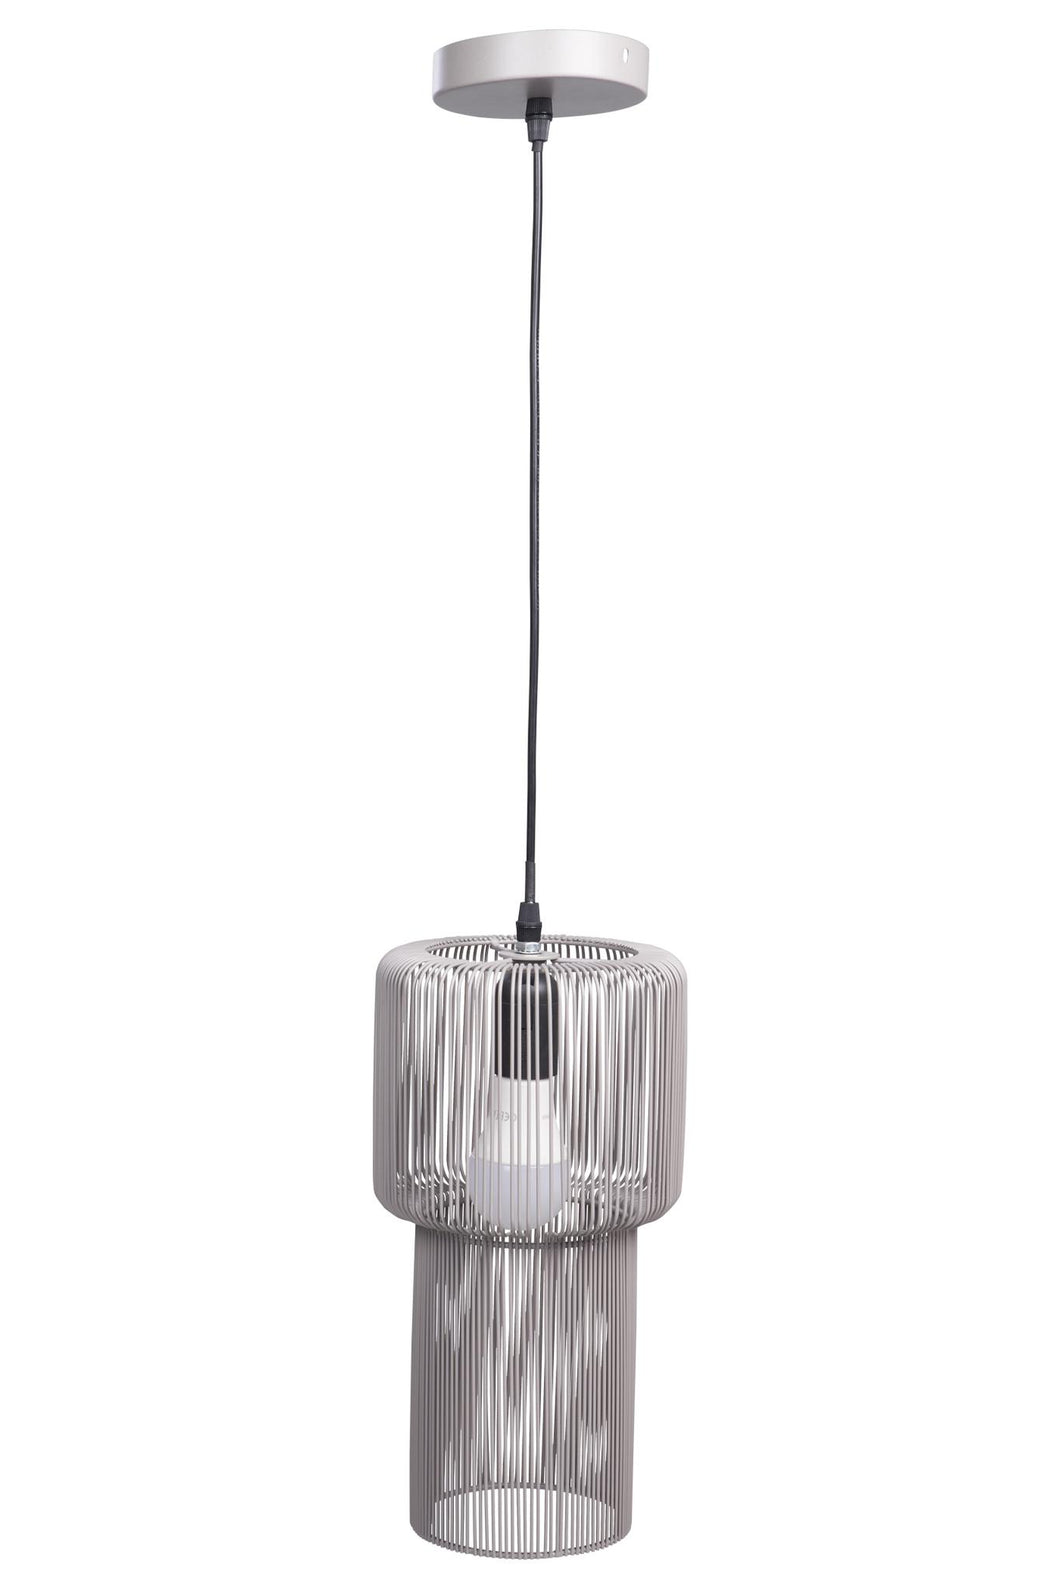 Orlando Store™ - Fyn - Tubular Chandelier with Gray Metal Wires